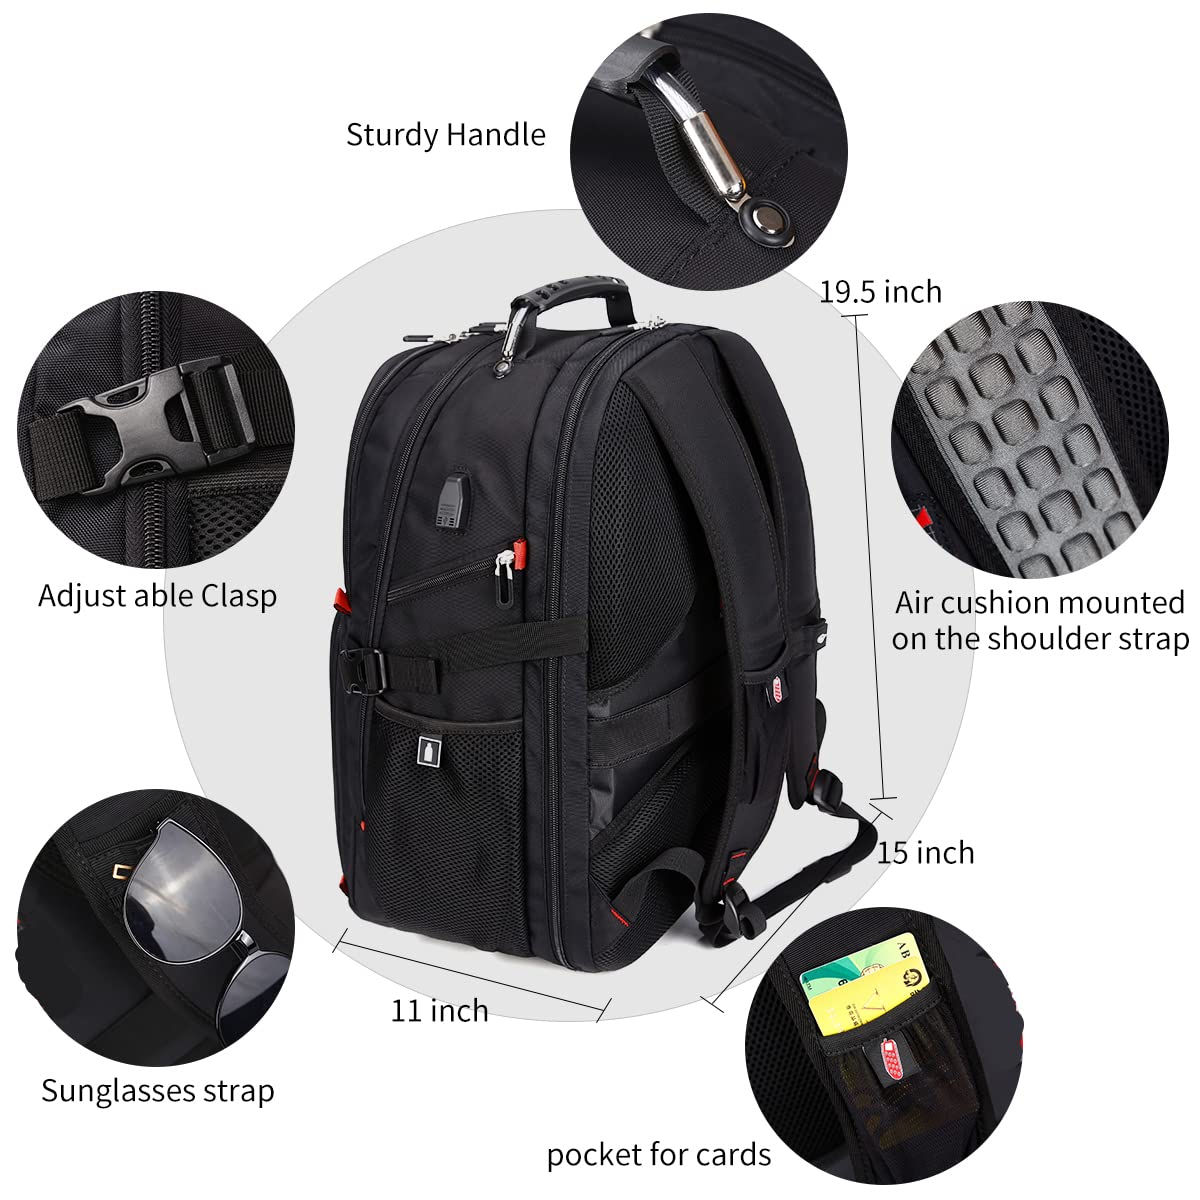 Extra Large 52L Travel Laptop Backpack with USB Charging Port Fit 17 Inch Laptops for Men Women